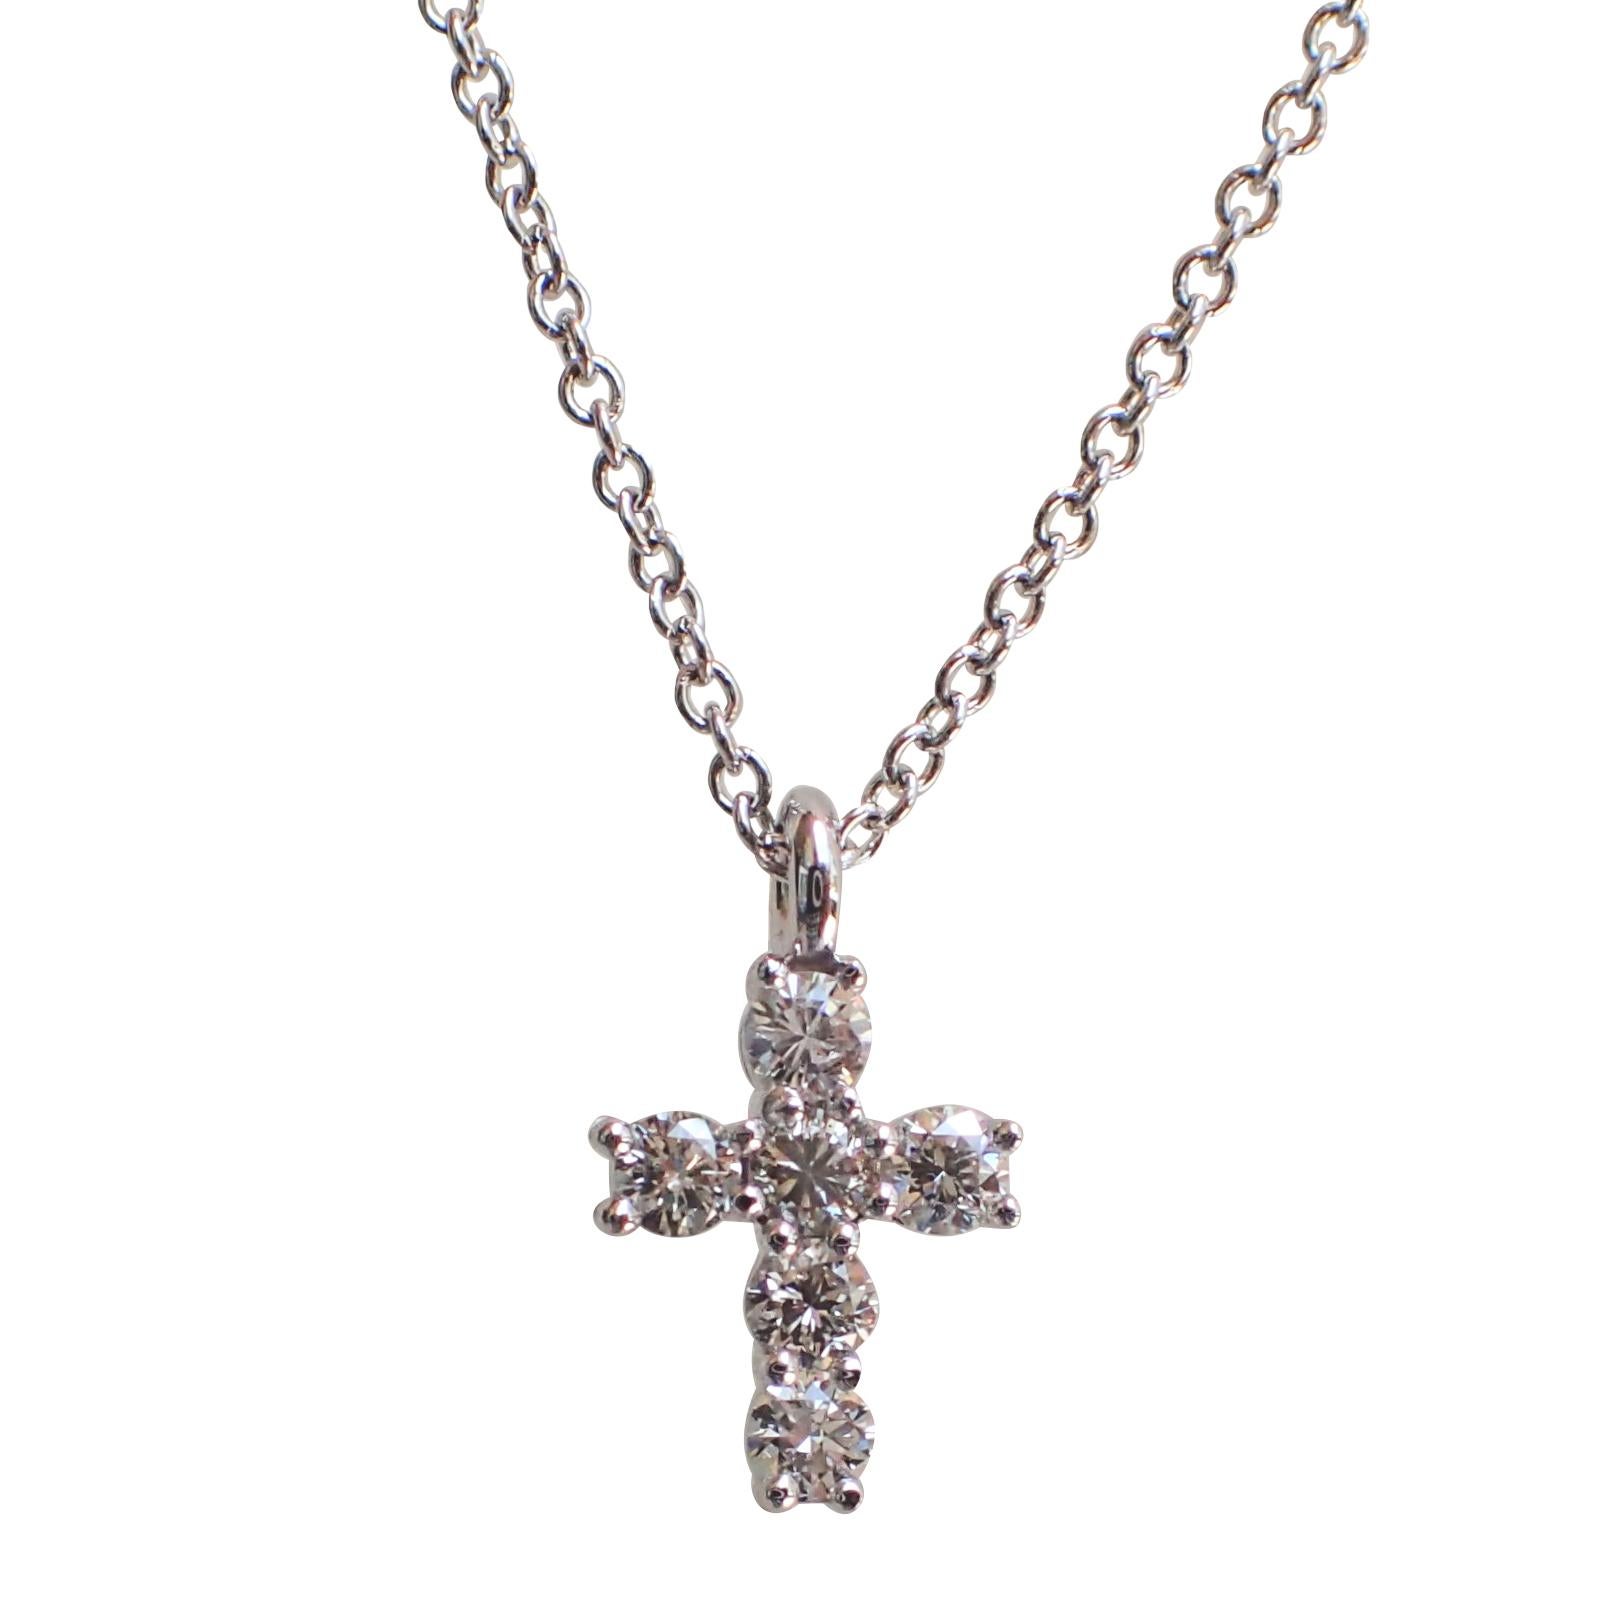 14 Karat White Gold Tiny Cross with 0.30 Carat of Diamond on Cable Chain